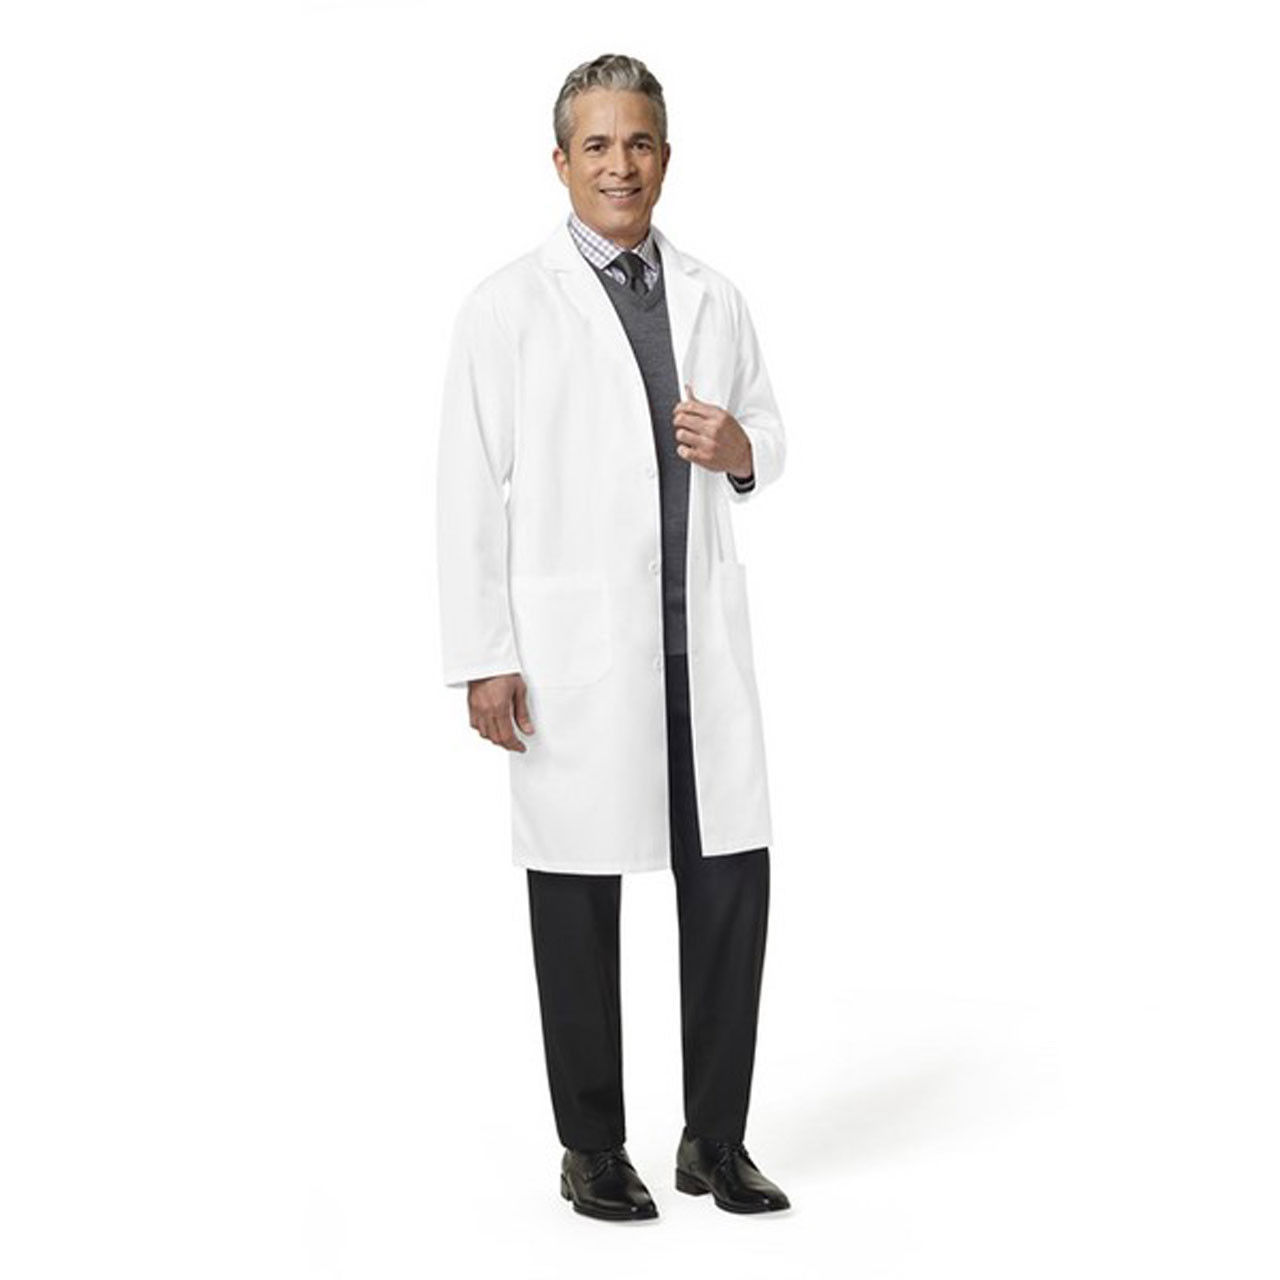 Are these lab jackets for men bulk a good addition to a uniform?